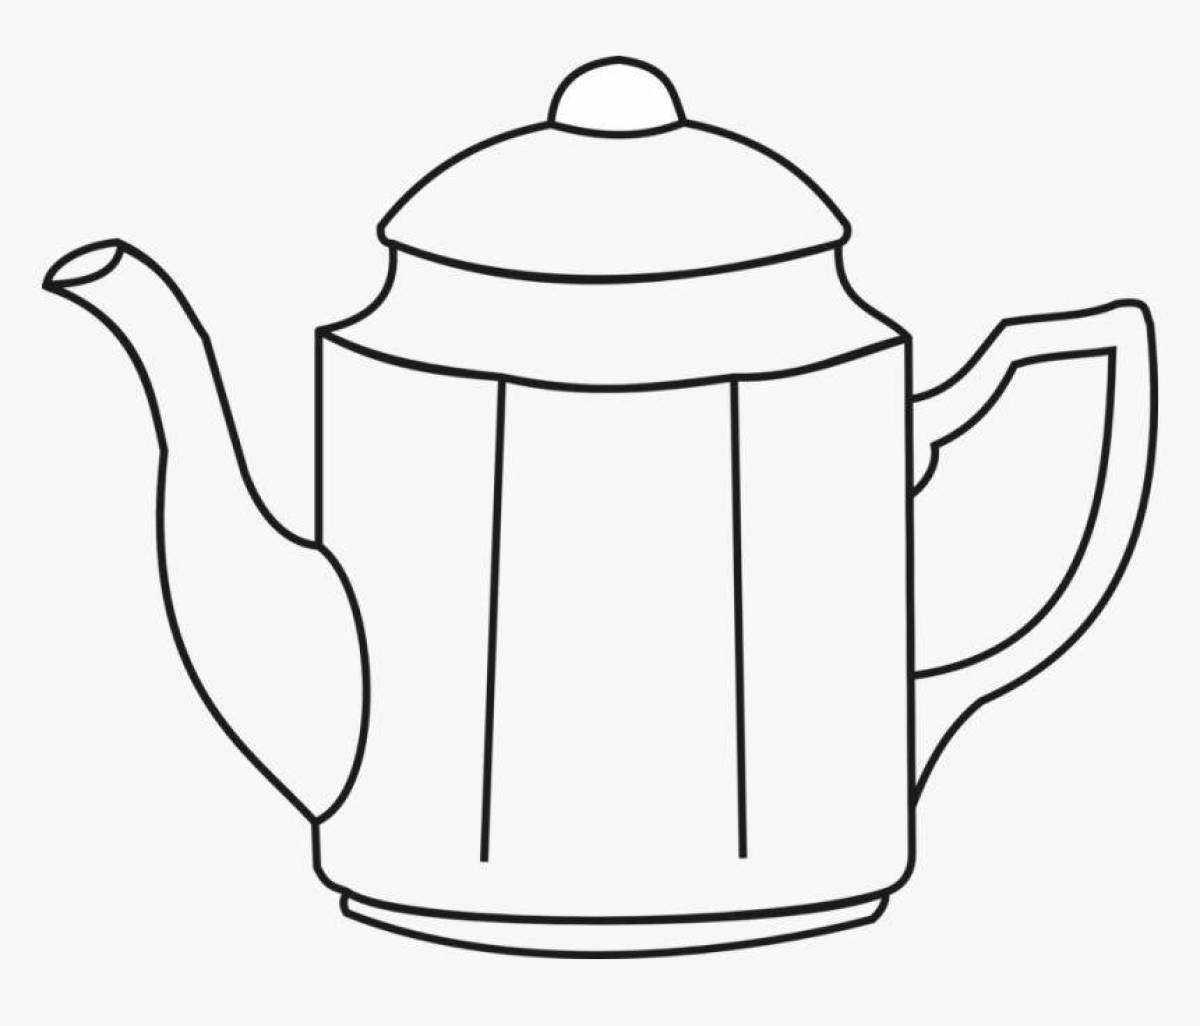 Exciting juvenile teapot coloring